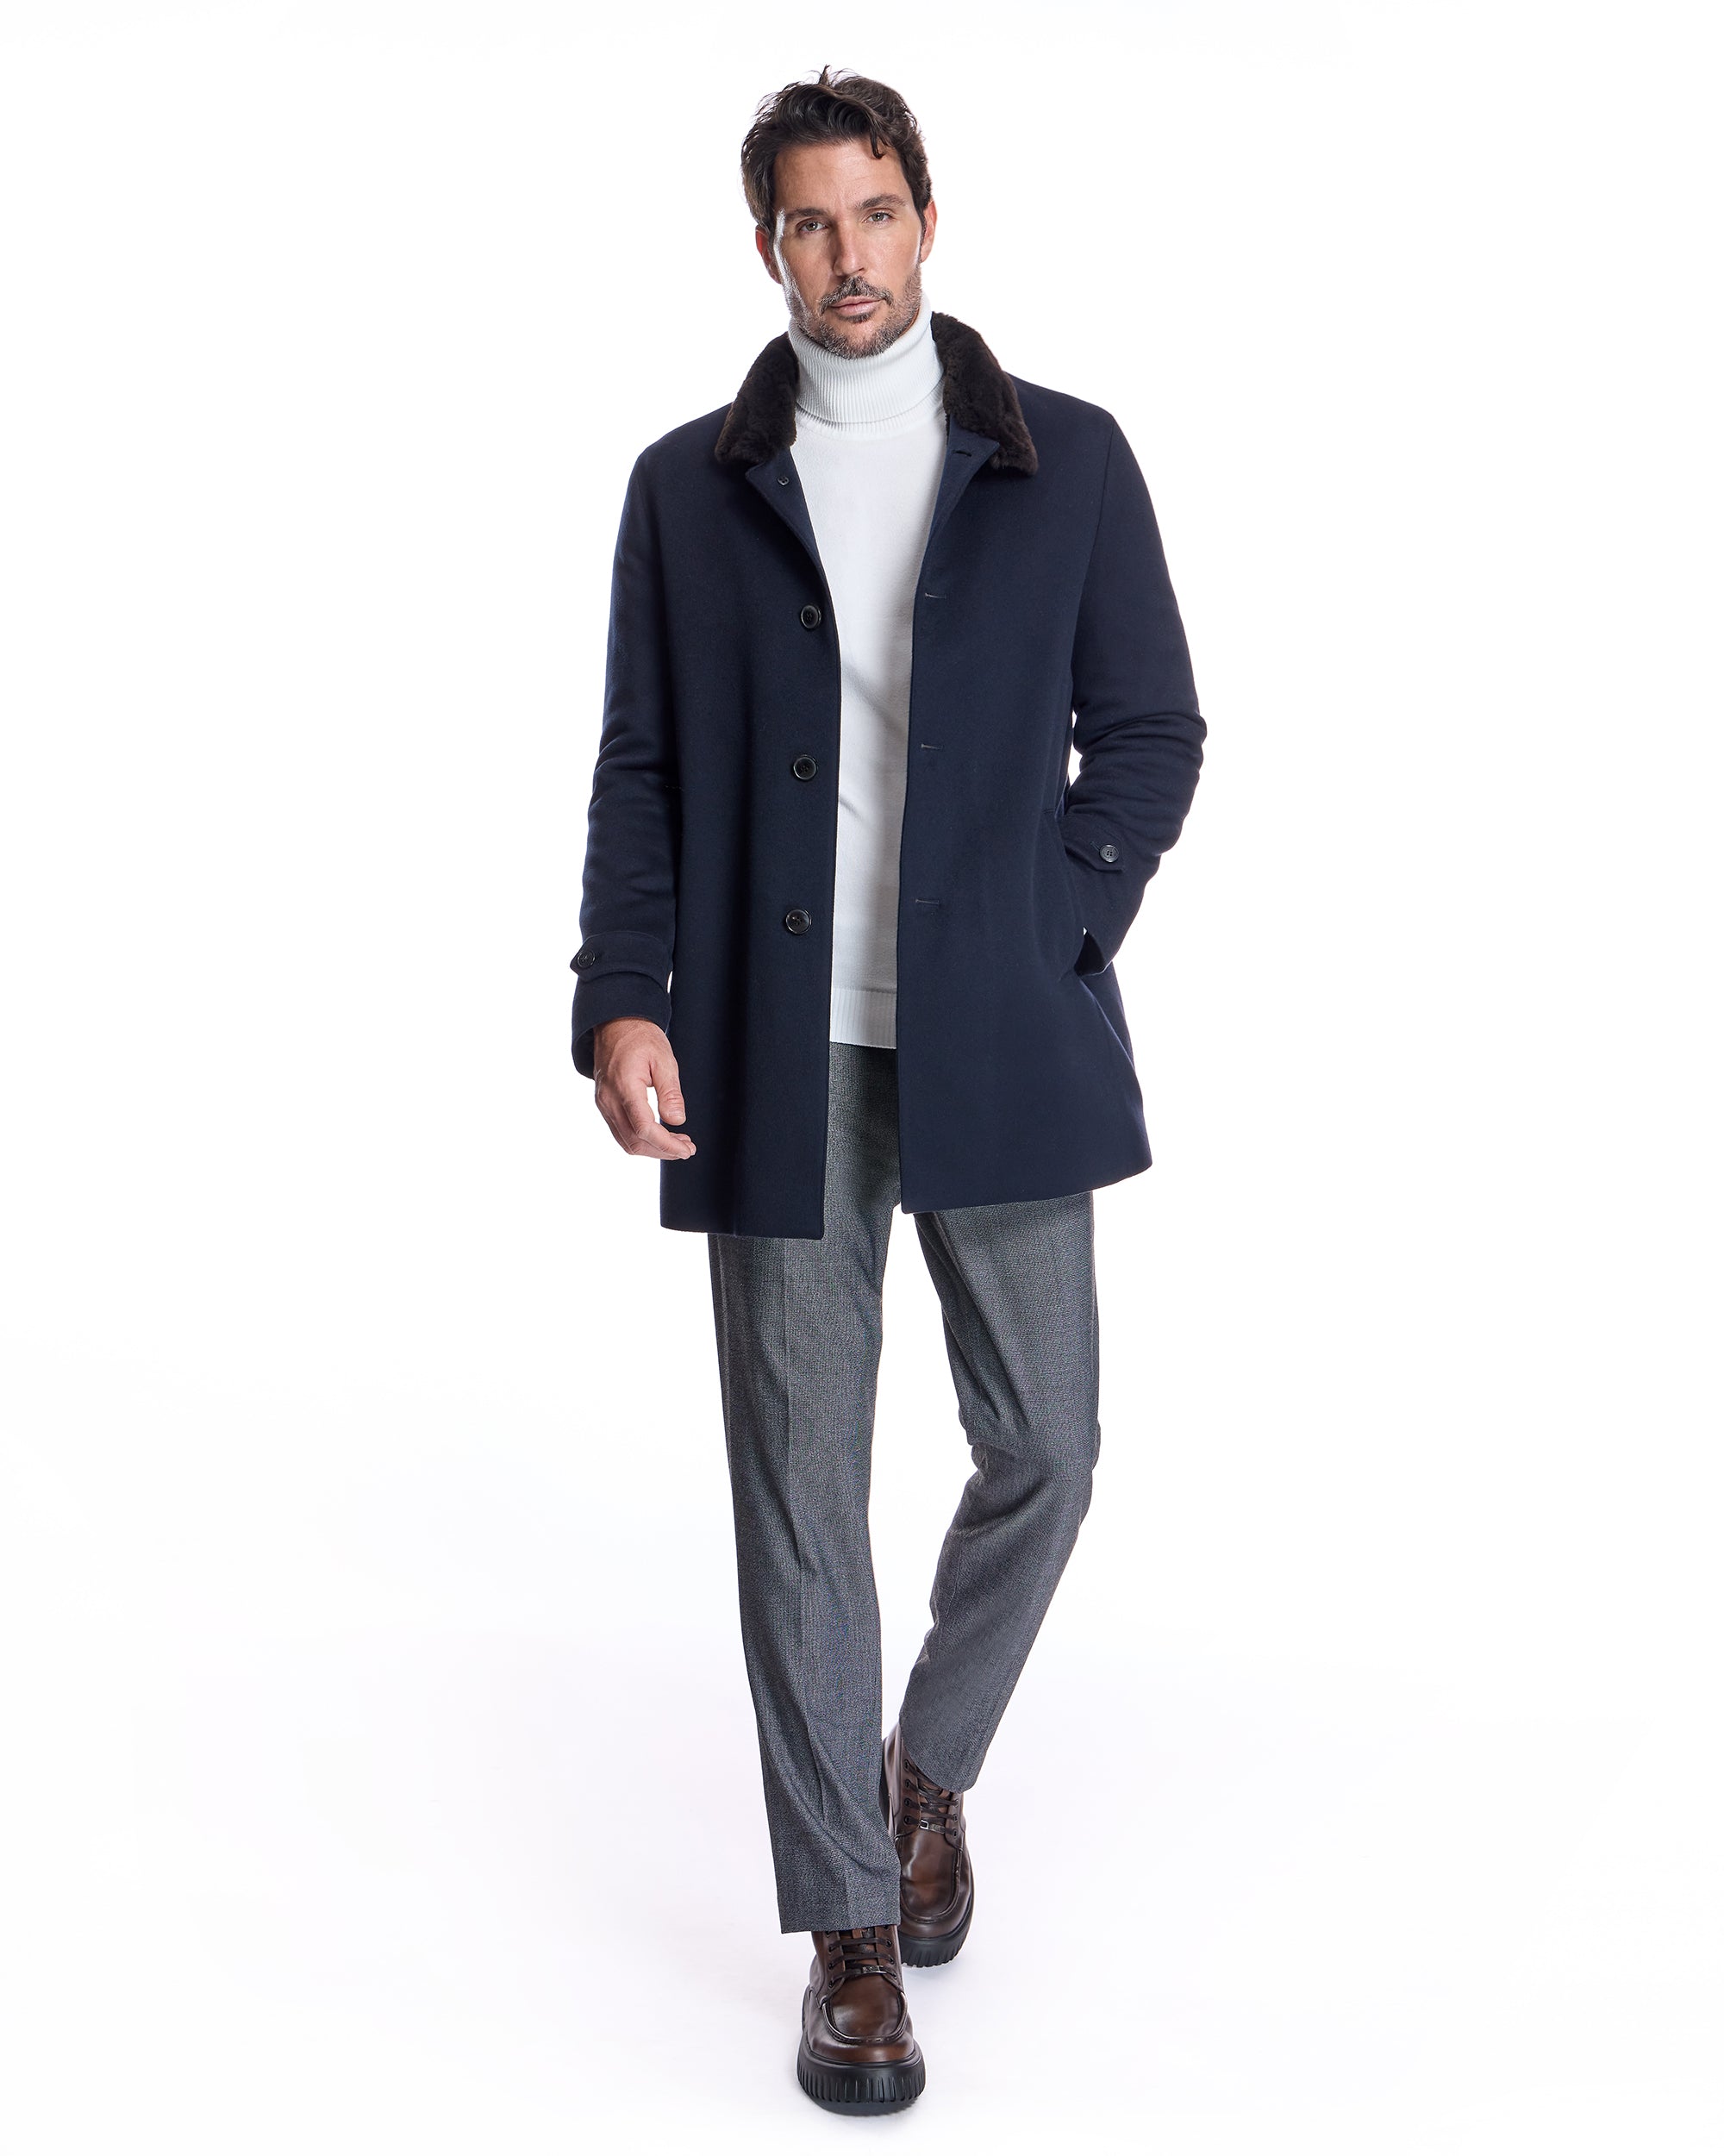 Men's Cashmere Jacket with Nutria Lining